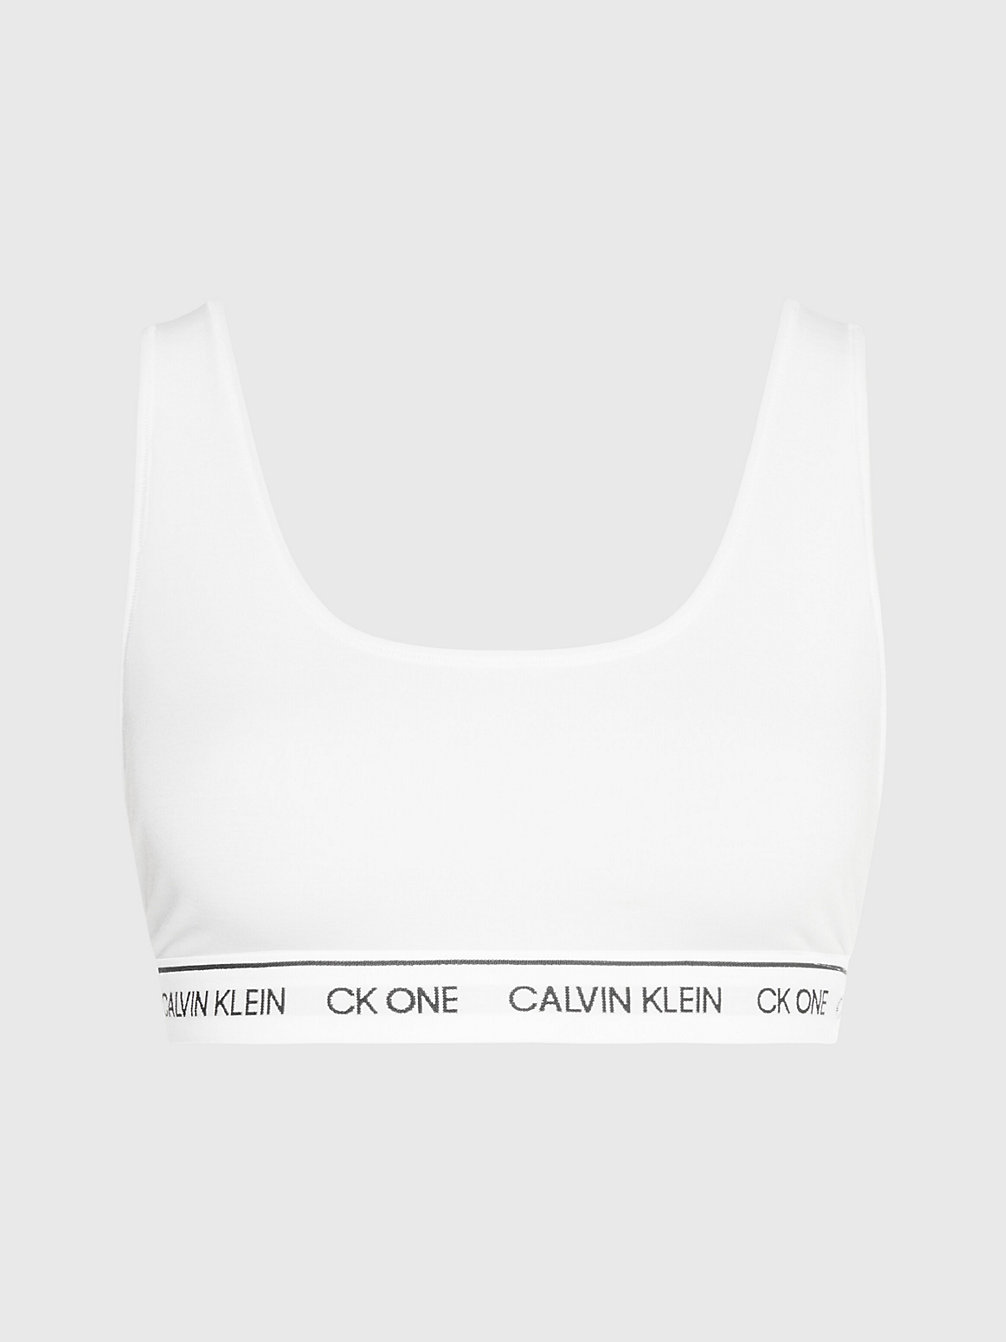 Corpiño - CK One Recycled > WHITE > undefined mujer > Calvin Klein